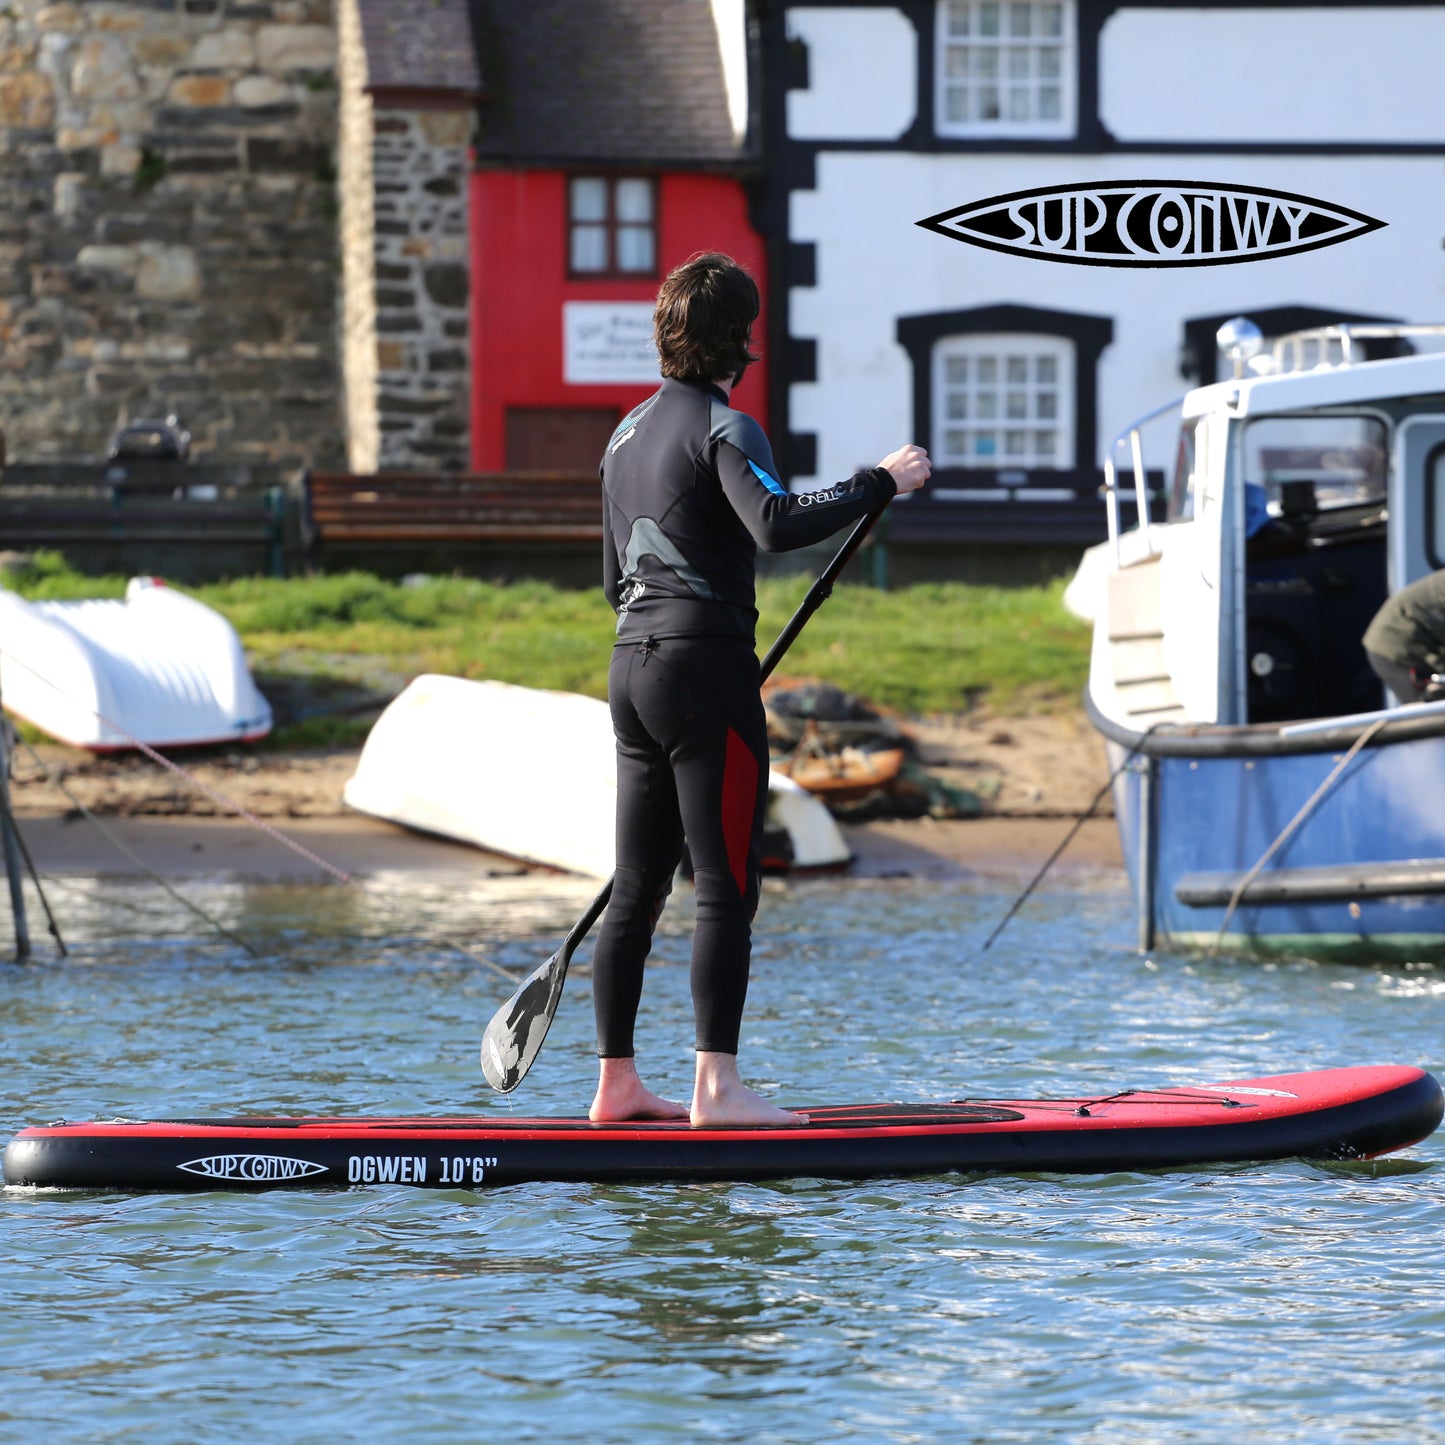 SUP Conwy - Ogwen - 10'6 Inflatable Stand Up Paddle Board - 3